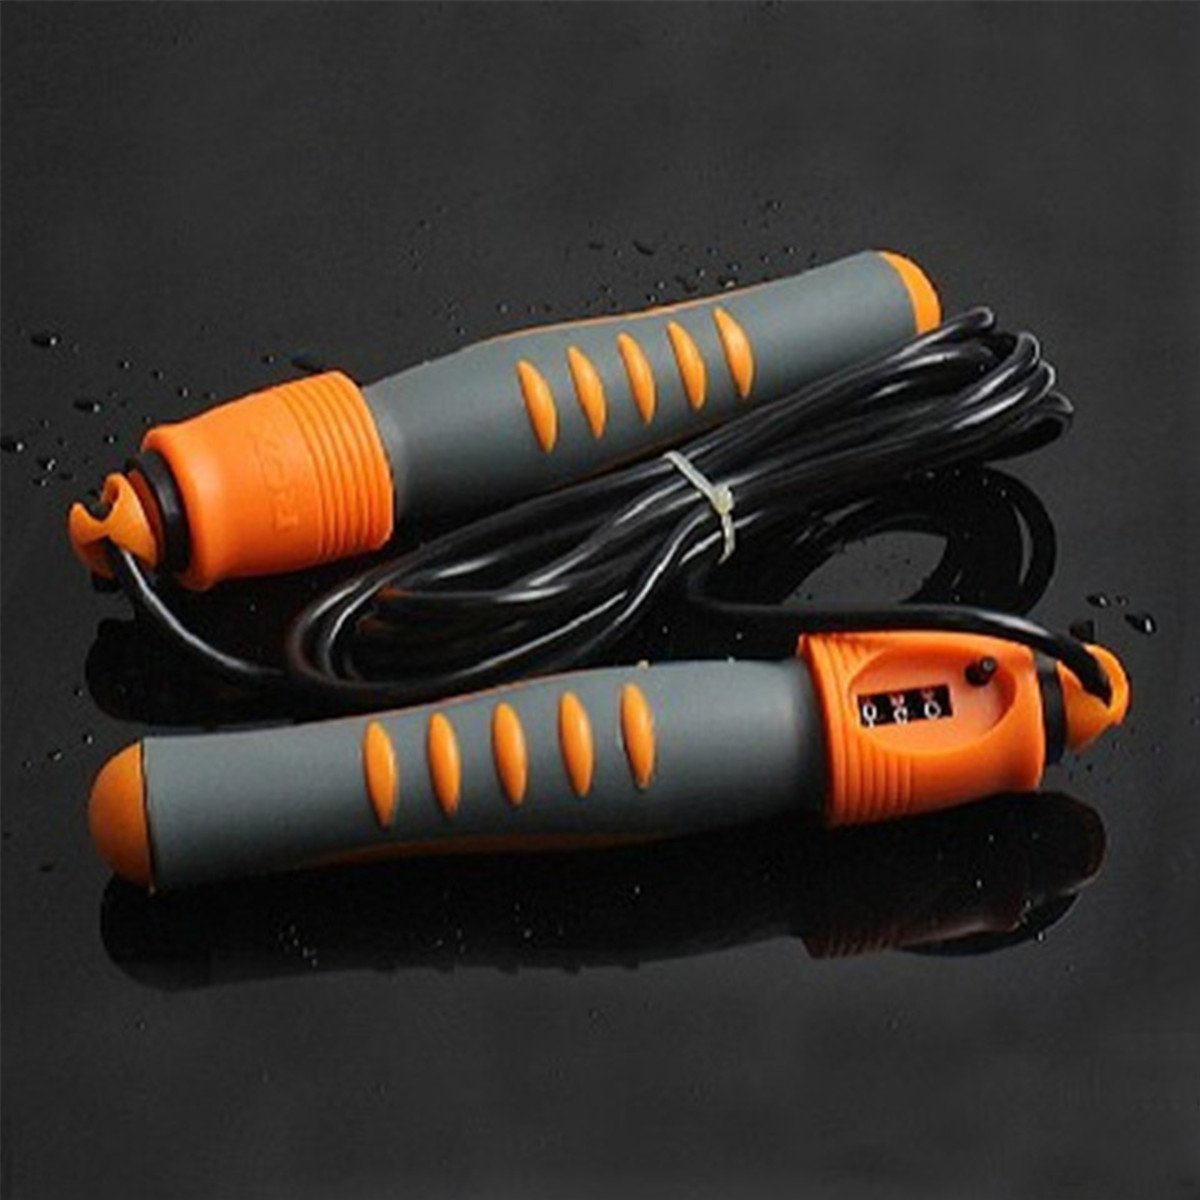 28M-12P-Rubber-Handle-Professional-Jumping-Rope-w-Counter-Home-Fast-Speed-Sport-Adjustable-Cardio-Ex-1660418-2